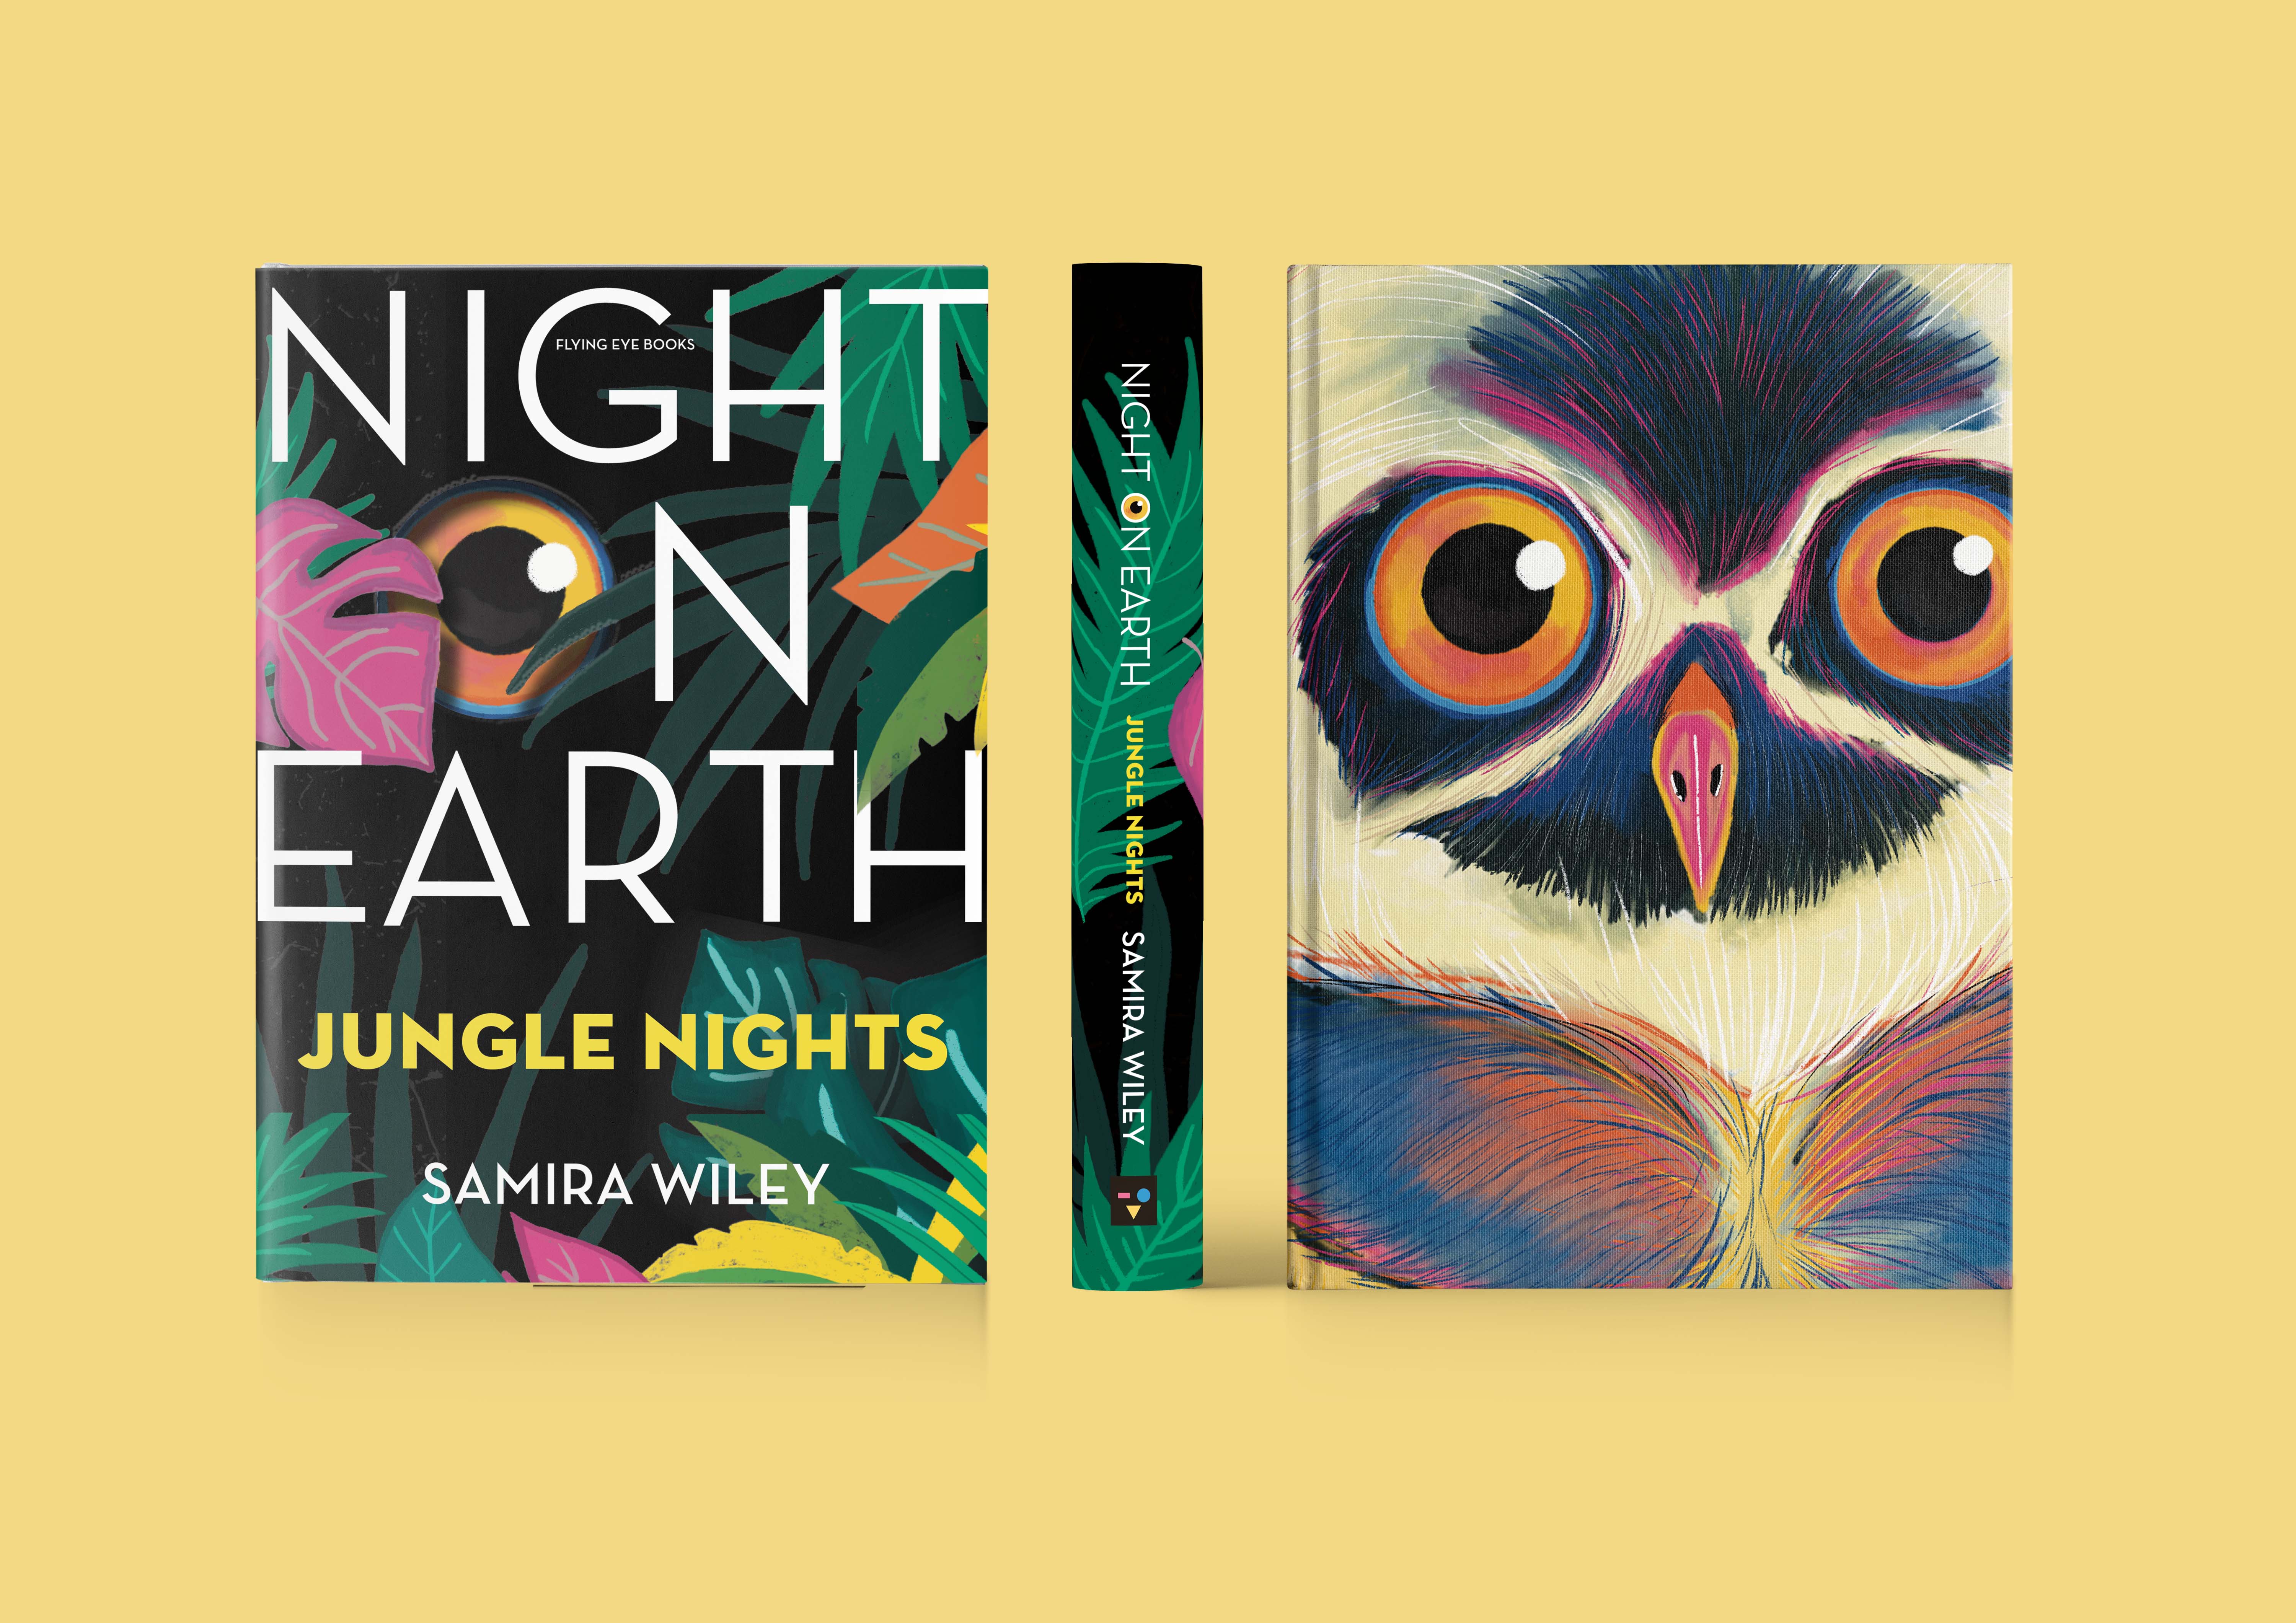 BA book design work by Katie Foreman, showing an illustrated dust jacket of jungle leaves, revealing a hard cover book of a colourful owl's head.